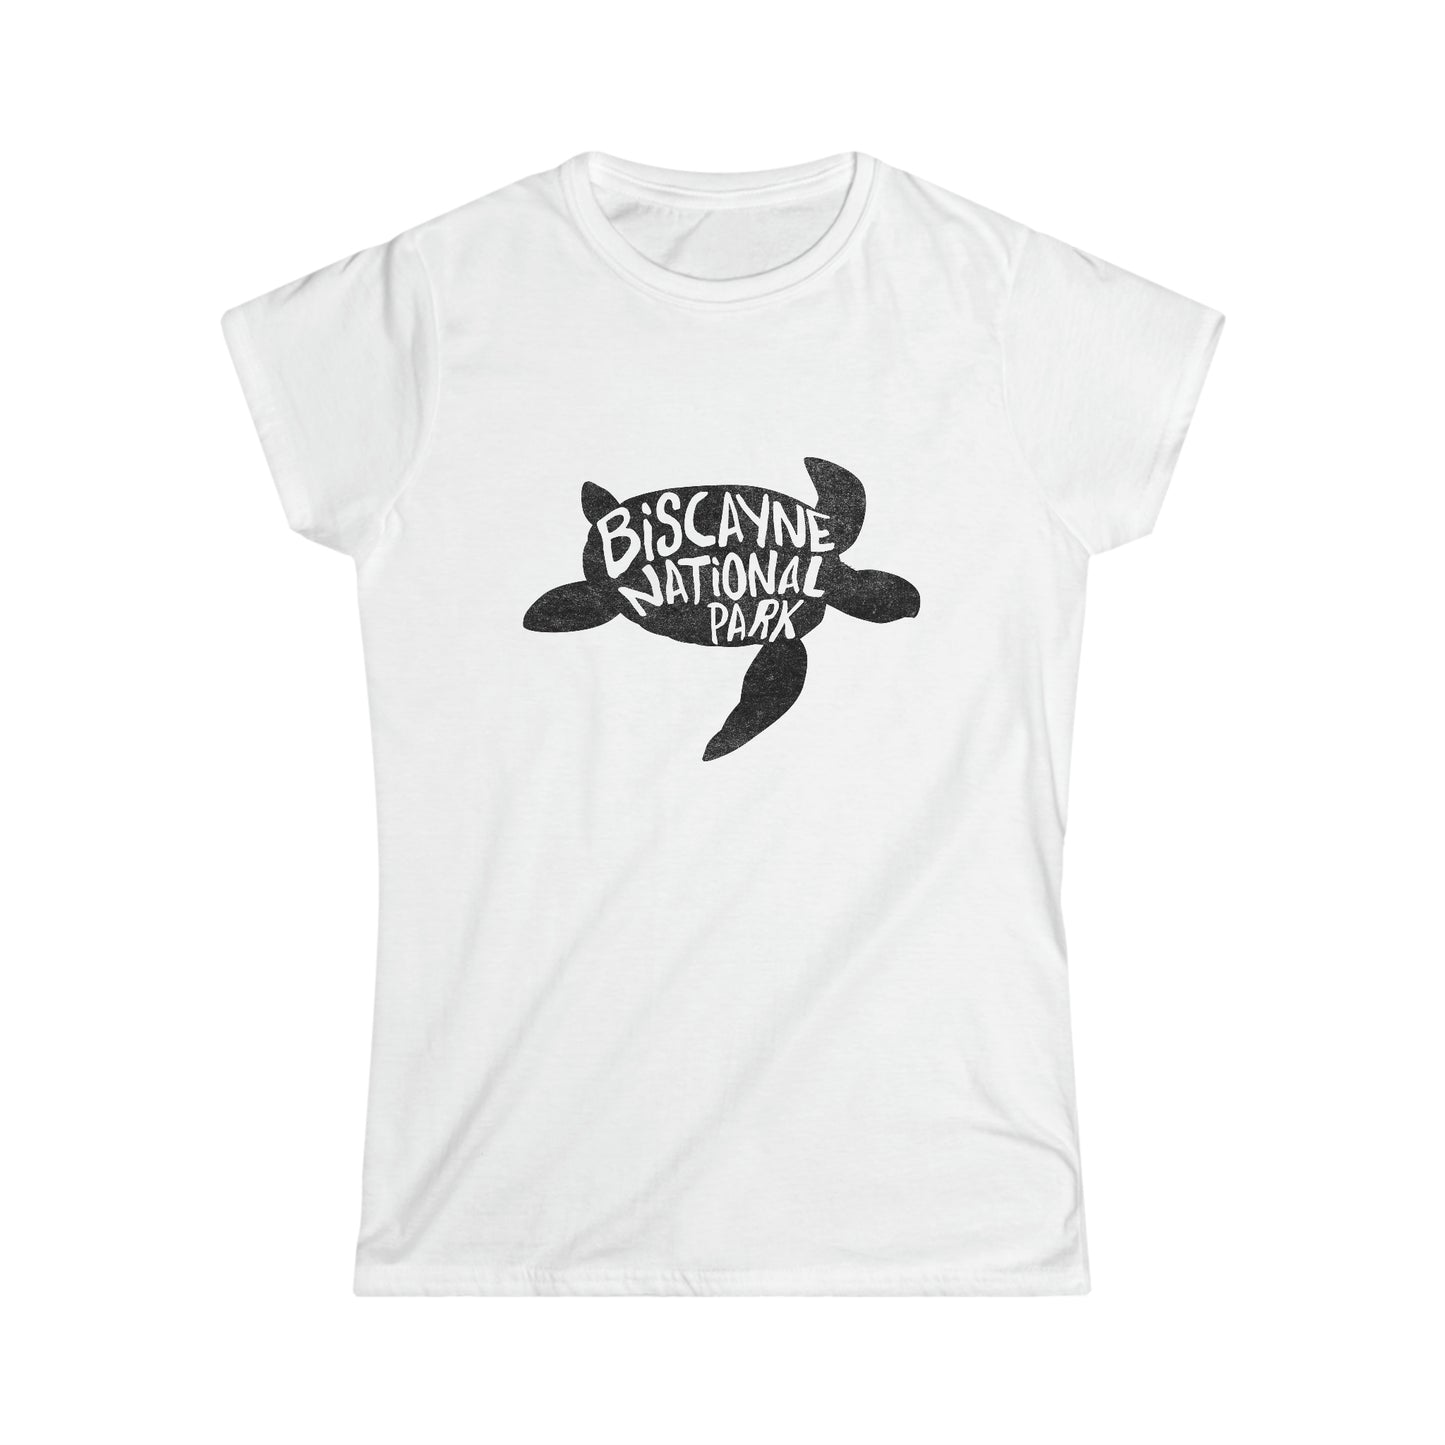 Biscayne National Park Women's T-Shirt - Sea Turtle